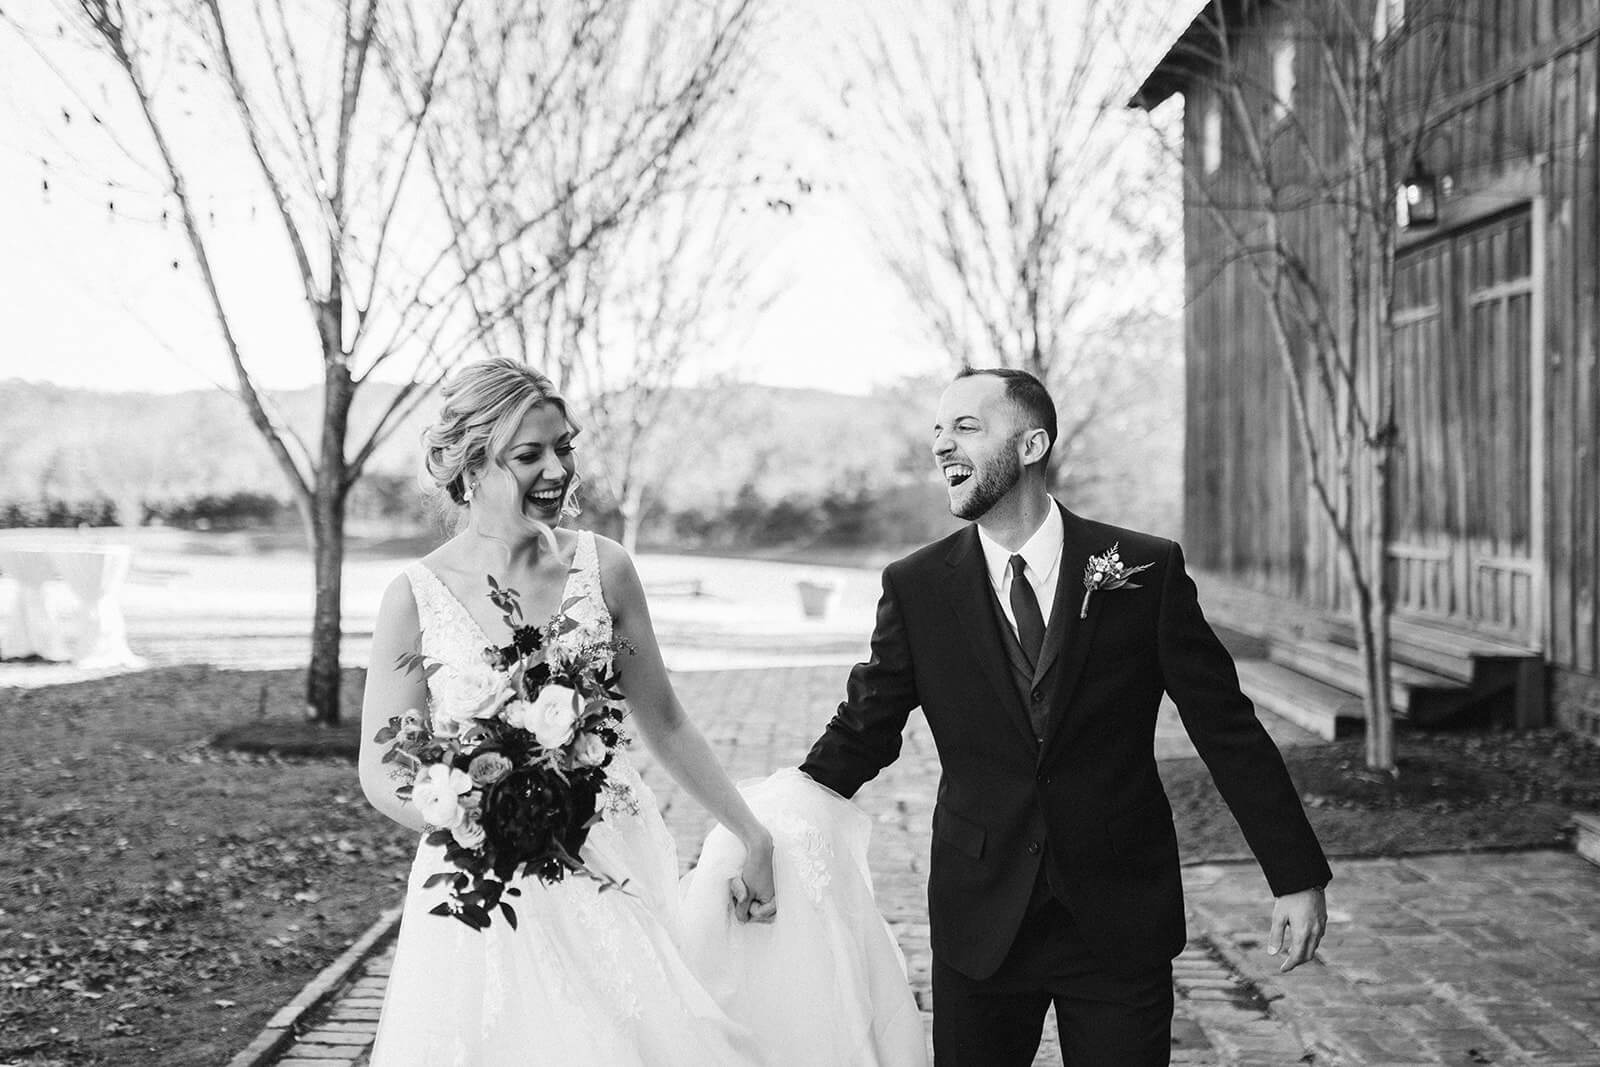 A black and white photo of a bride and groom walking hand-in-hand down a brick path by a barn.